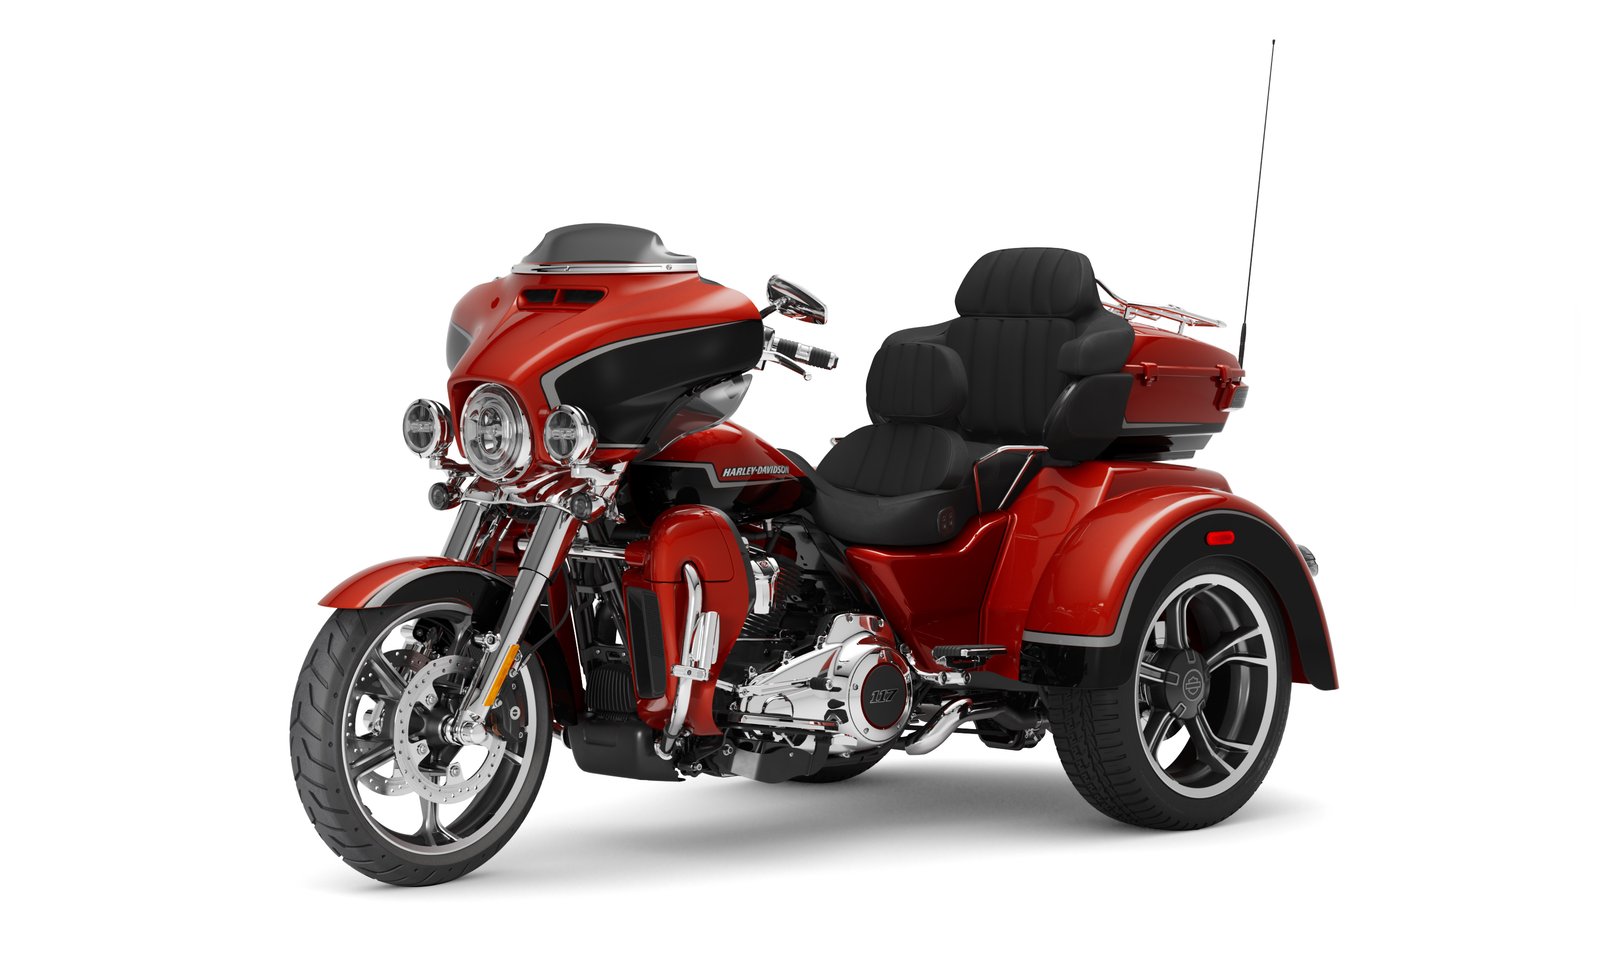 New Harley Davidson Cvo Limited For Sale In Mobile Mobile Bay Harley Davidson